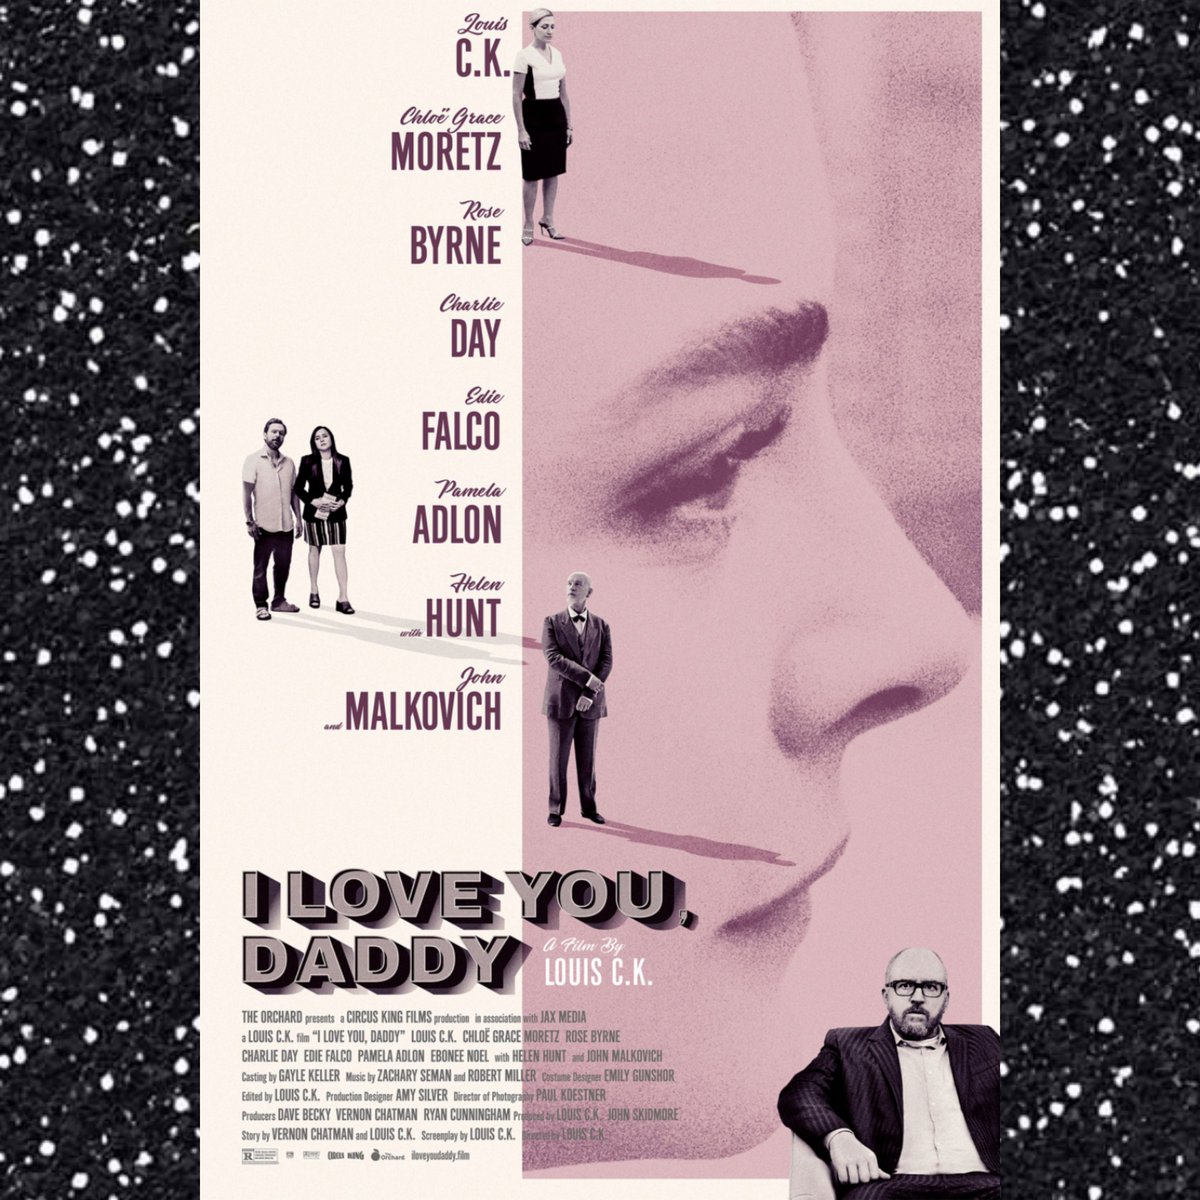 Now watching: the film that never got released. I Love You Daddy (2017) written and directed by Louis C.K. who also plays a lead role, along with a pretty impressive cast. I came across a screener copy of this ill-fated film. @OfficialLouisCK https://t.co/nJ290NWdIc